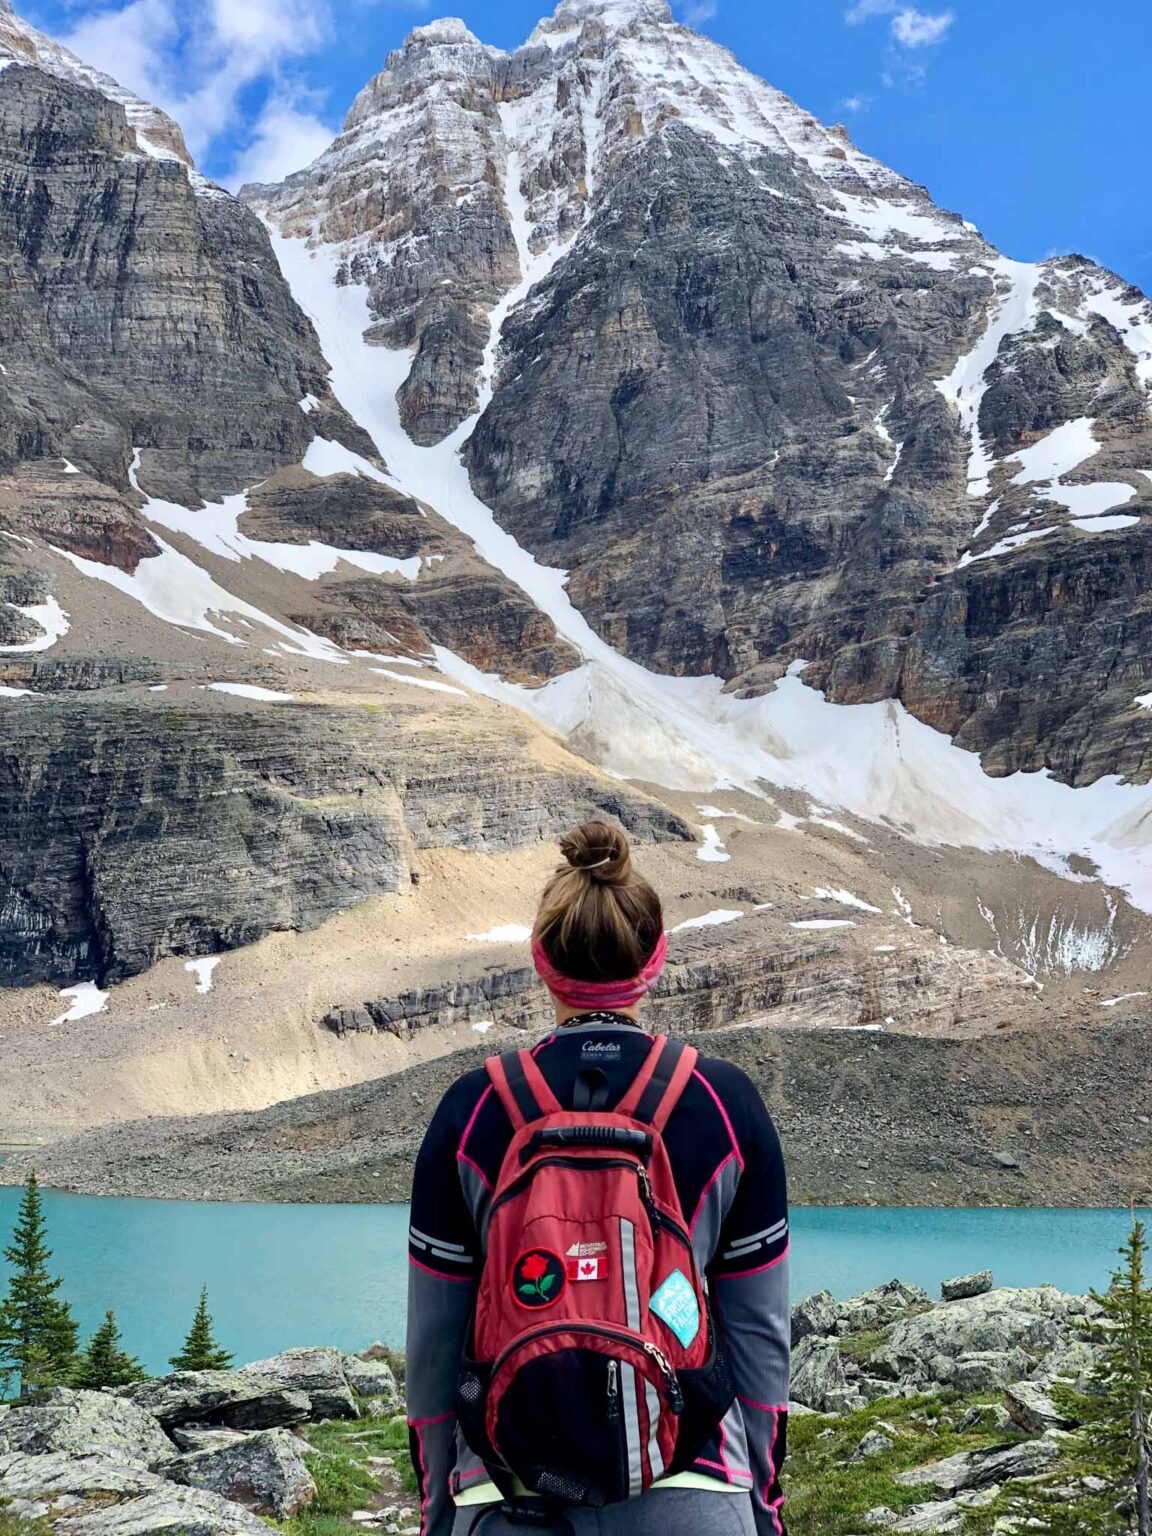 Picture of hiker photographed from behind looking out over a landscape of towering mountains and turquoise lake. The power of your own two feet is the most sustainable way to recreate.